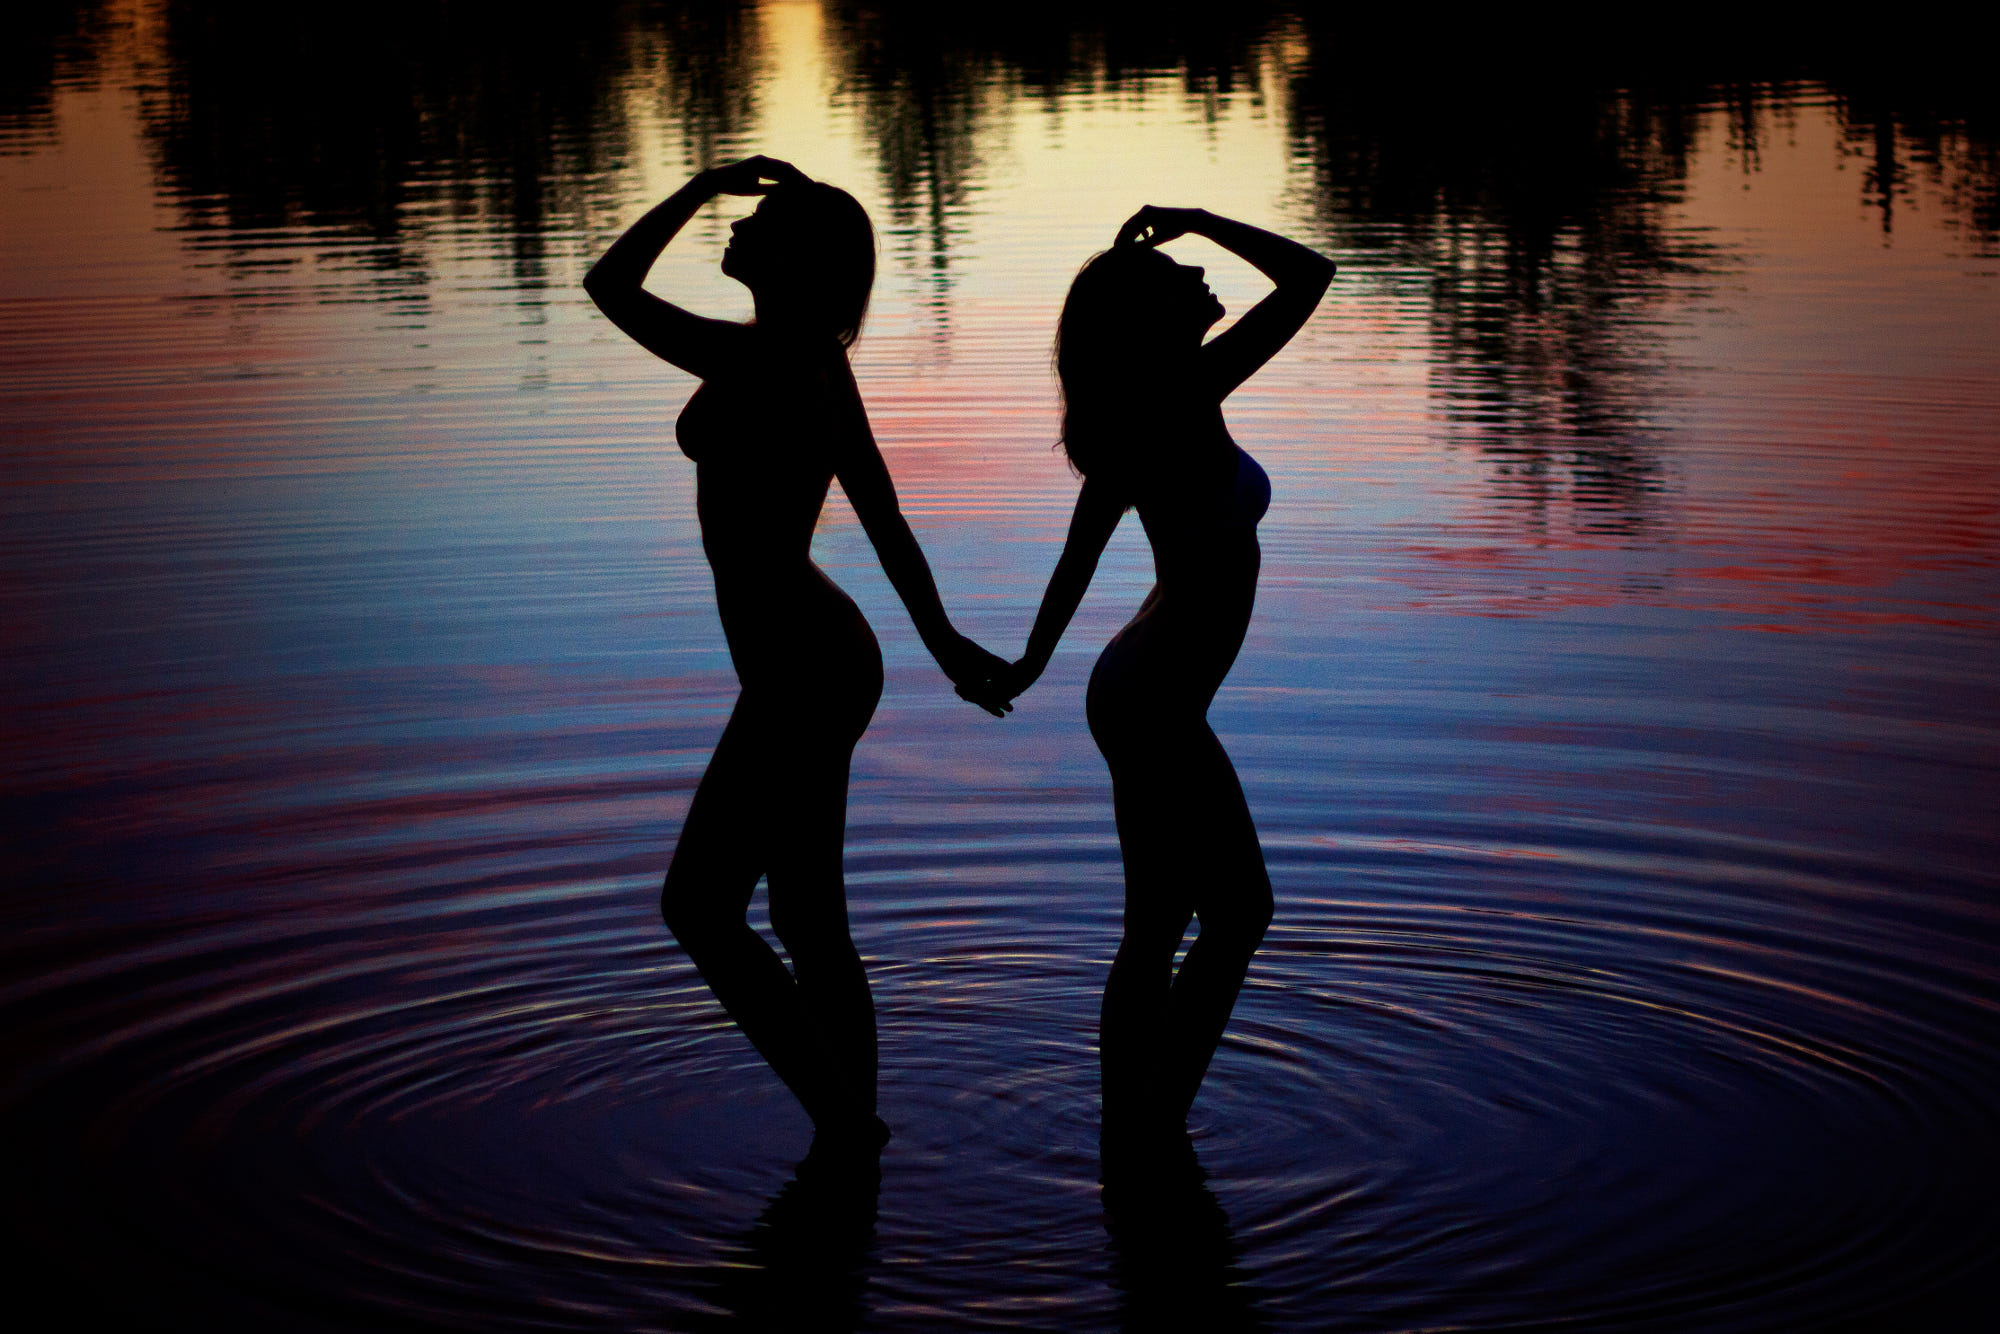 People 2000x1334 women women outdoors water holding hands sunset reflection waves shadow Melanie Dietze silhouette two women nude nature in water standing low light